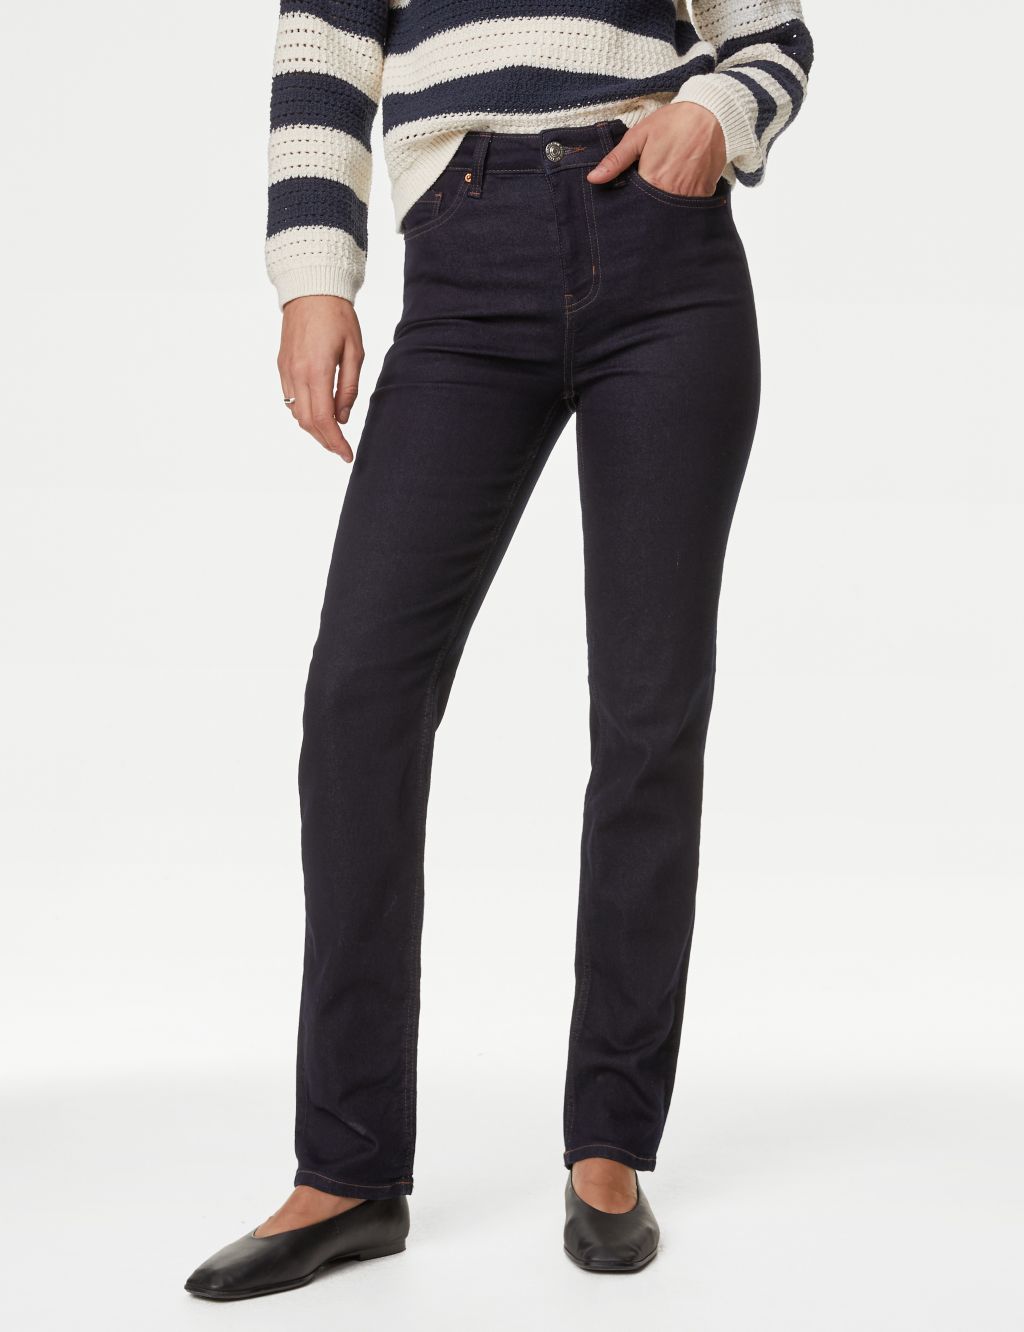 Sienna Straight Leg Jeans with Stretch image 4